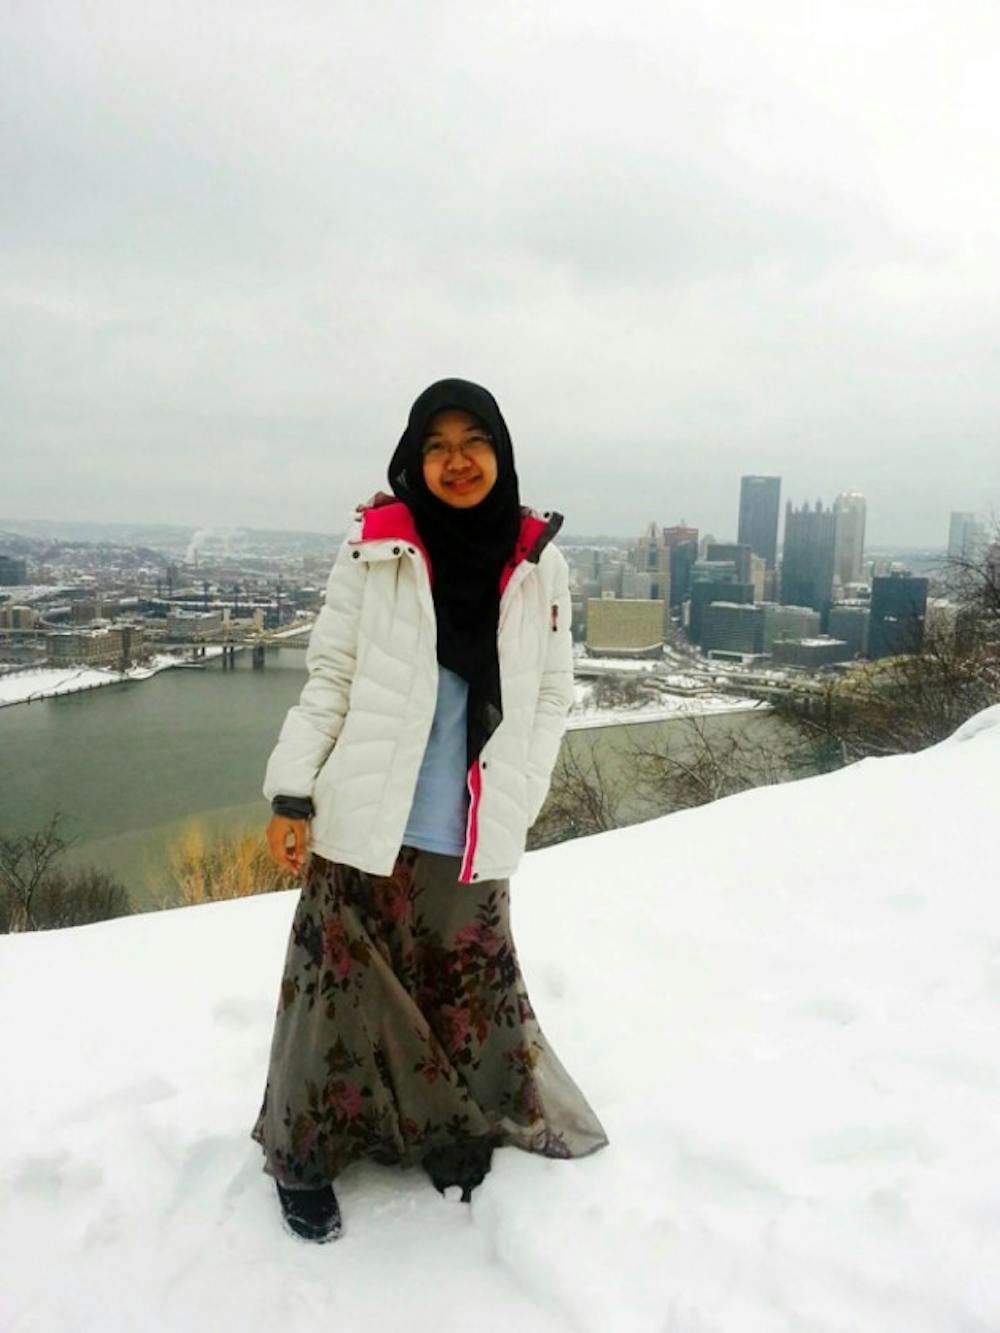 Farhana Shafi&#39;s first winter in Buffalo ended
too early, when the&nbsp;senior biotechnology and
communication major from Malaysia
didn&#39;t get the chance to build the perfect snowman.
Courtesy of Nur Rosdi